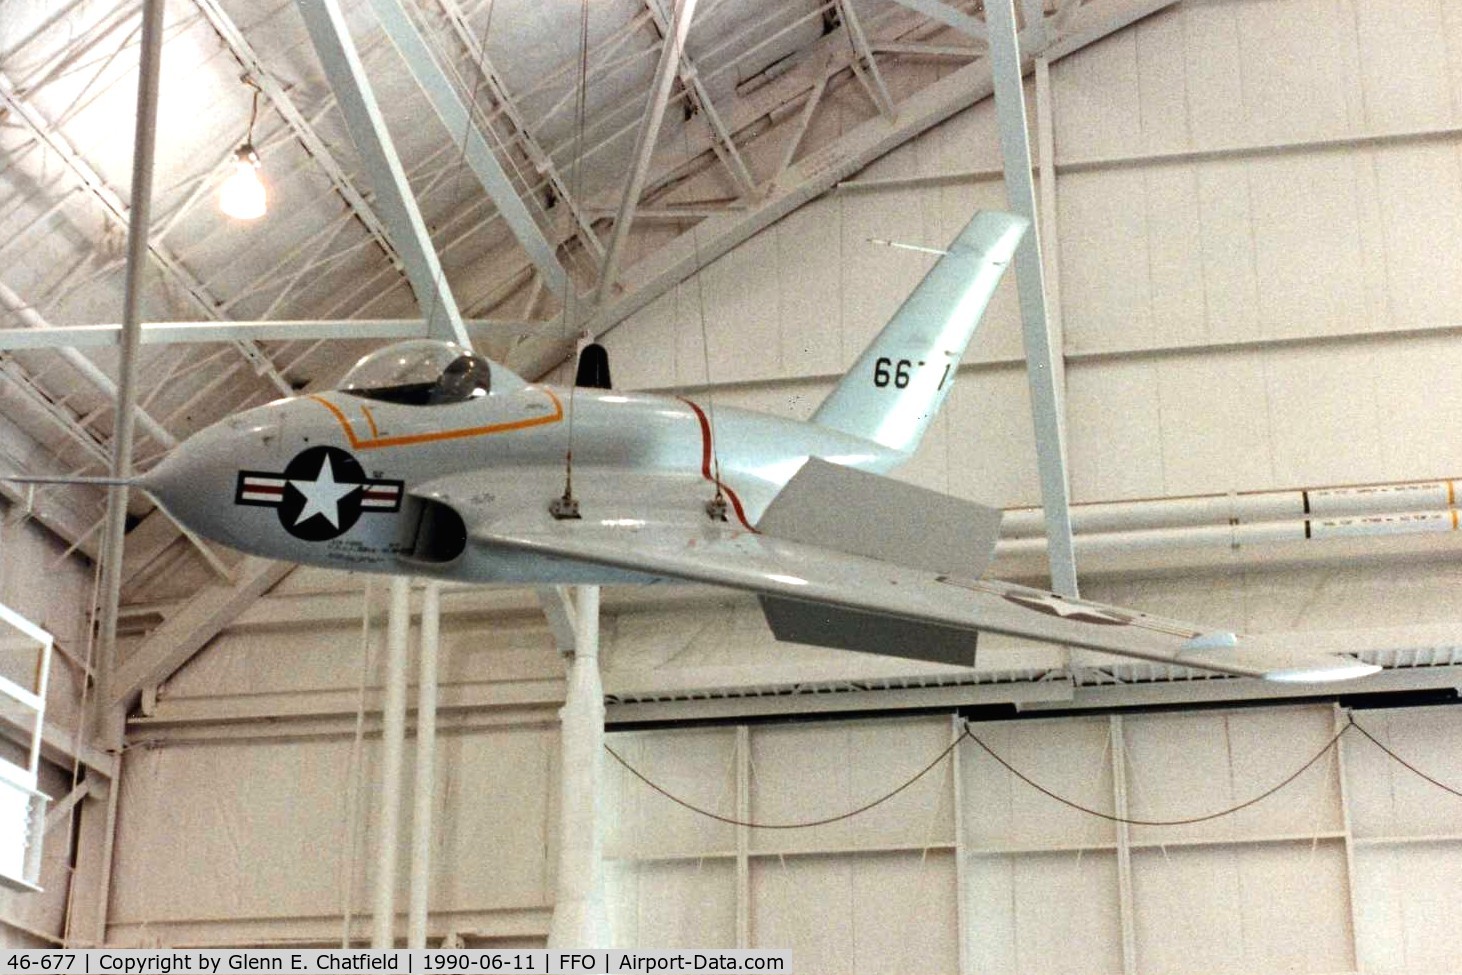 46-677, 1946 Northrop X-4 Bantam C/N Not found (46-677), X-4 at the National Museum of the U.S. Air Force